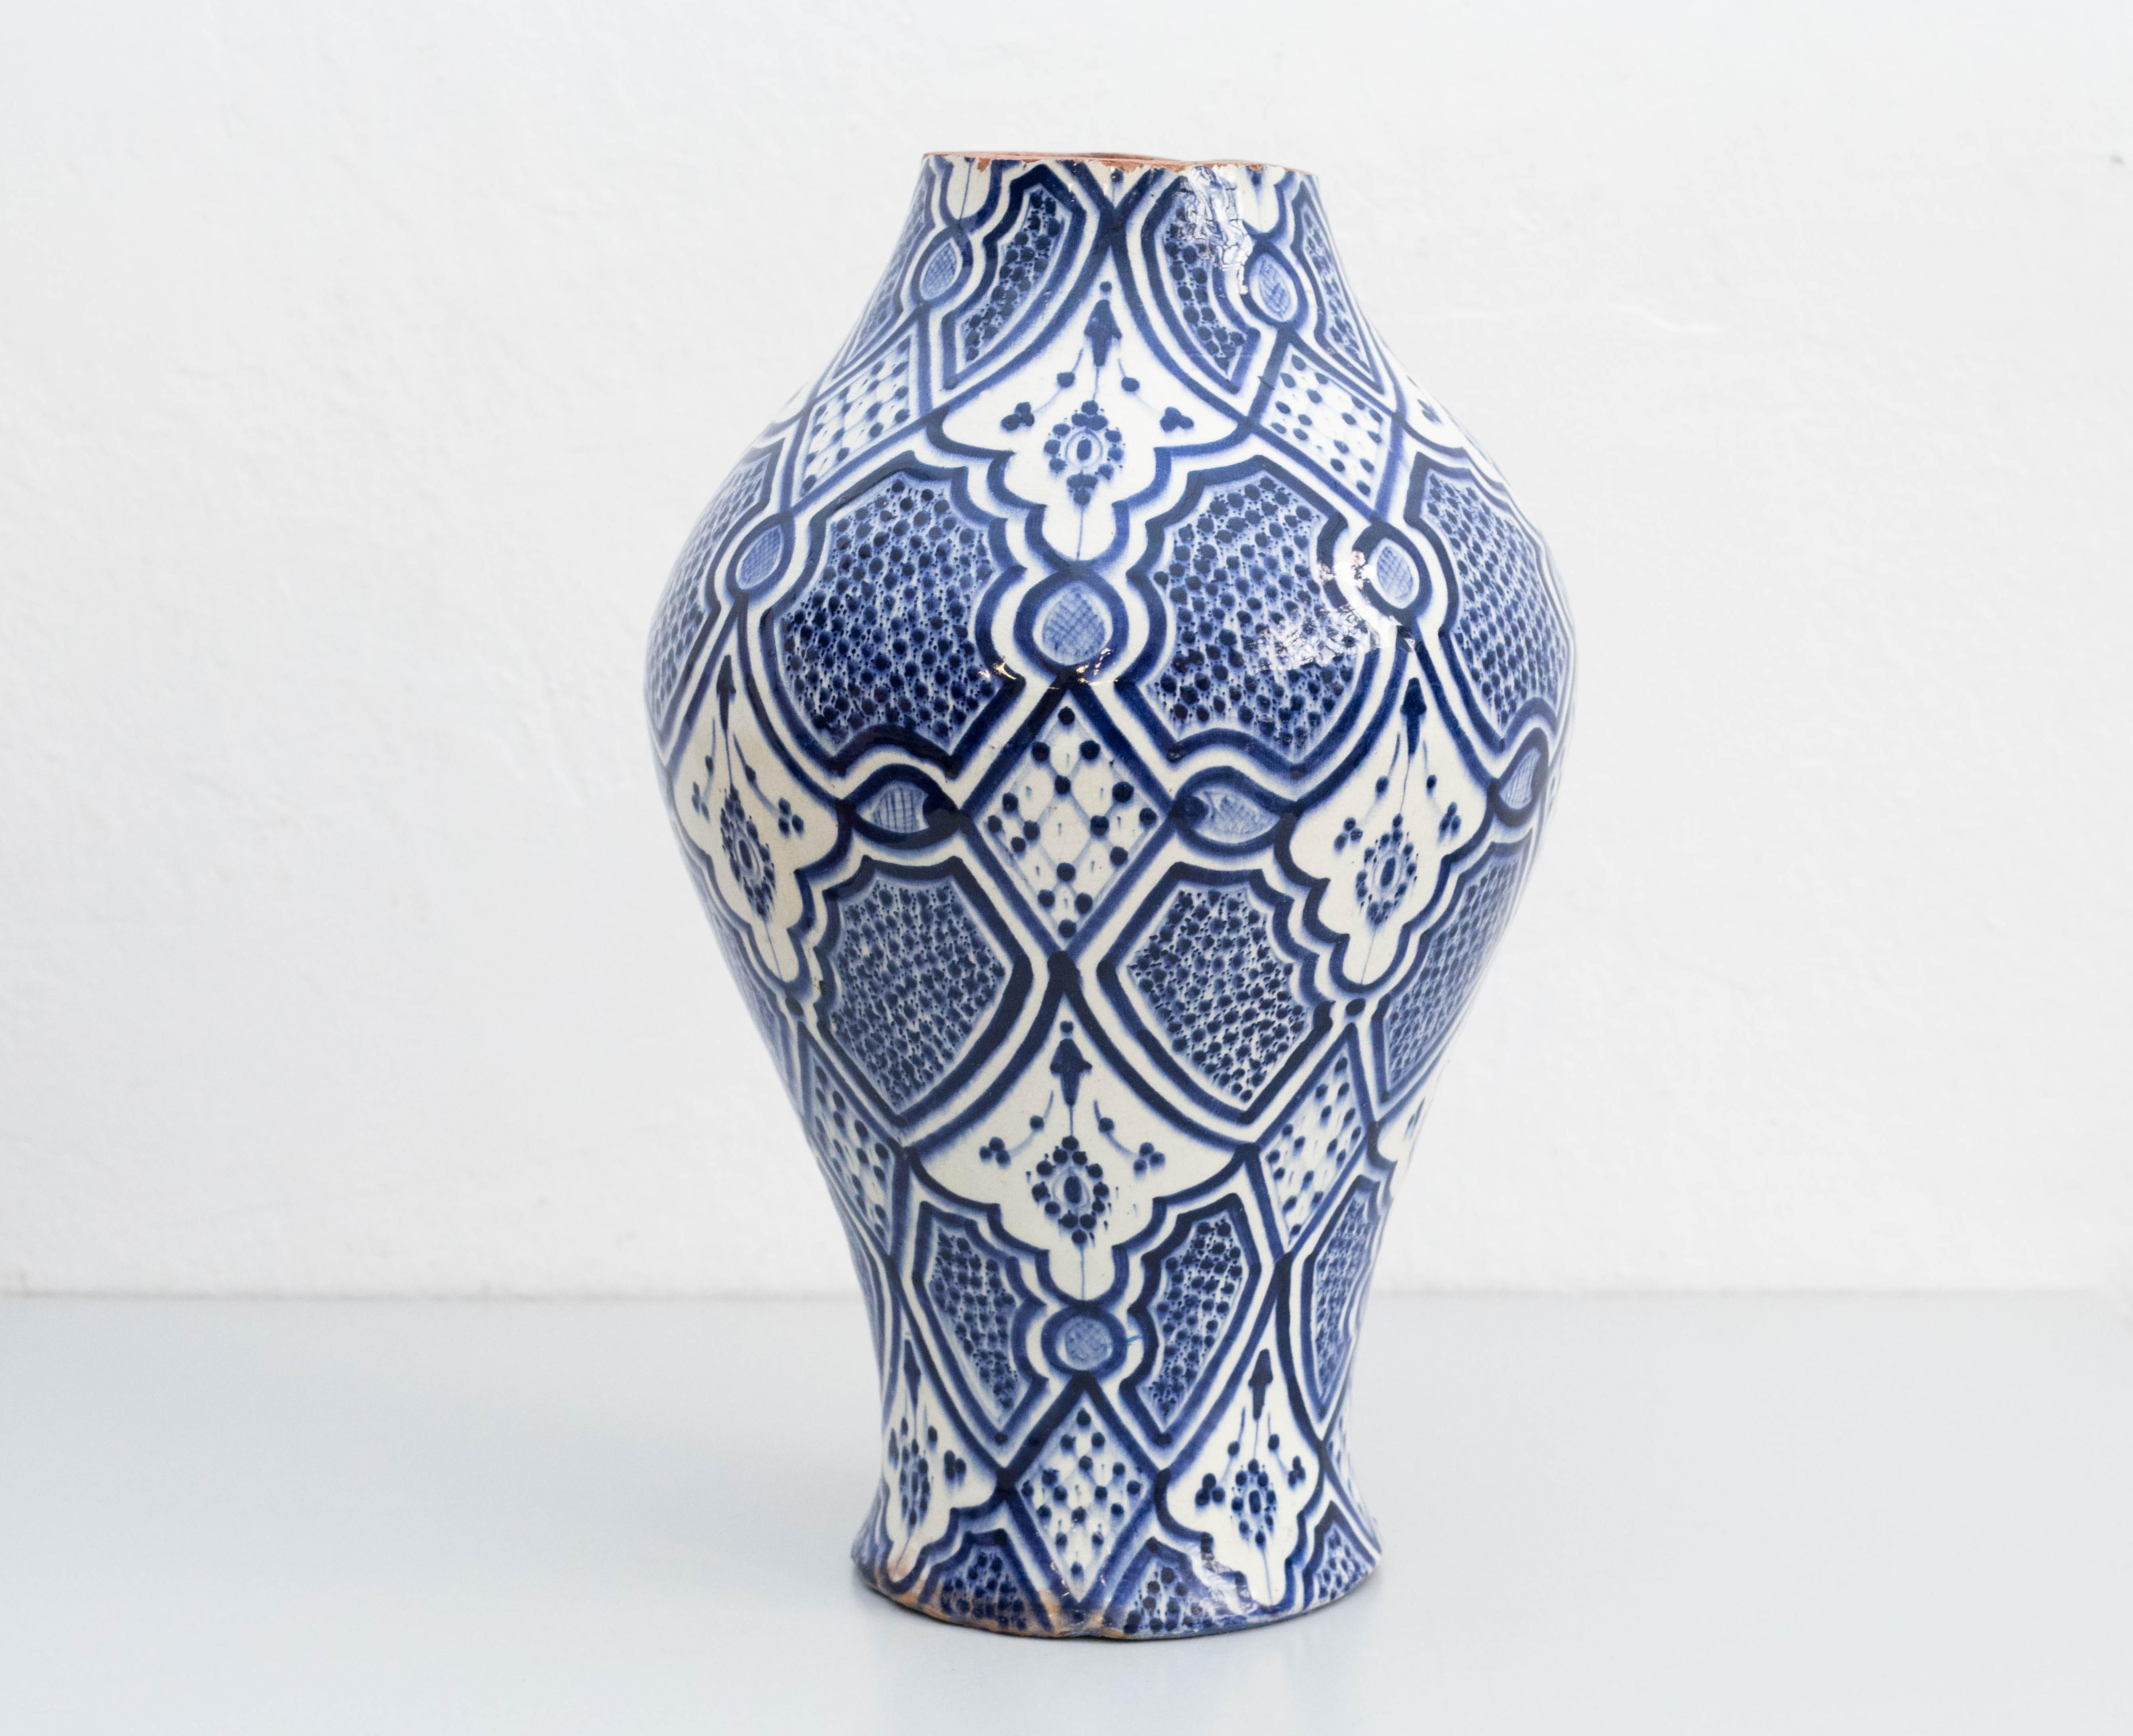 Ceramic hand painted vase, circa 1960.
Manufactured in Spain.

In original condition, with minor wear consistent of age and use, preserving a beautiul patina.

Material:
Ceramic.
 